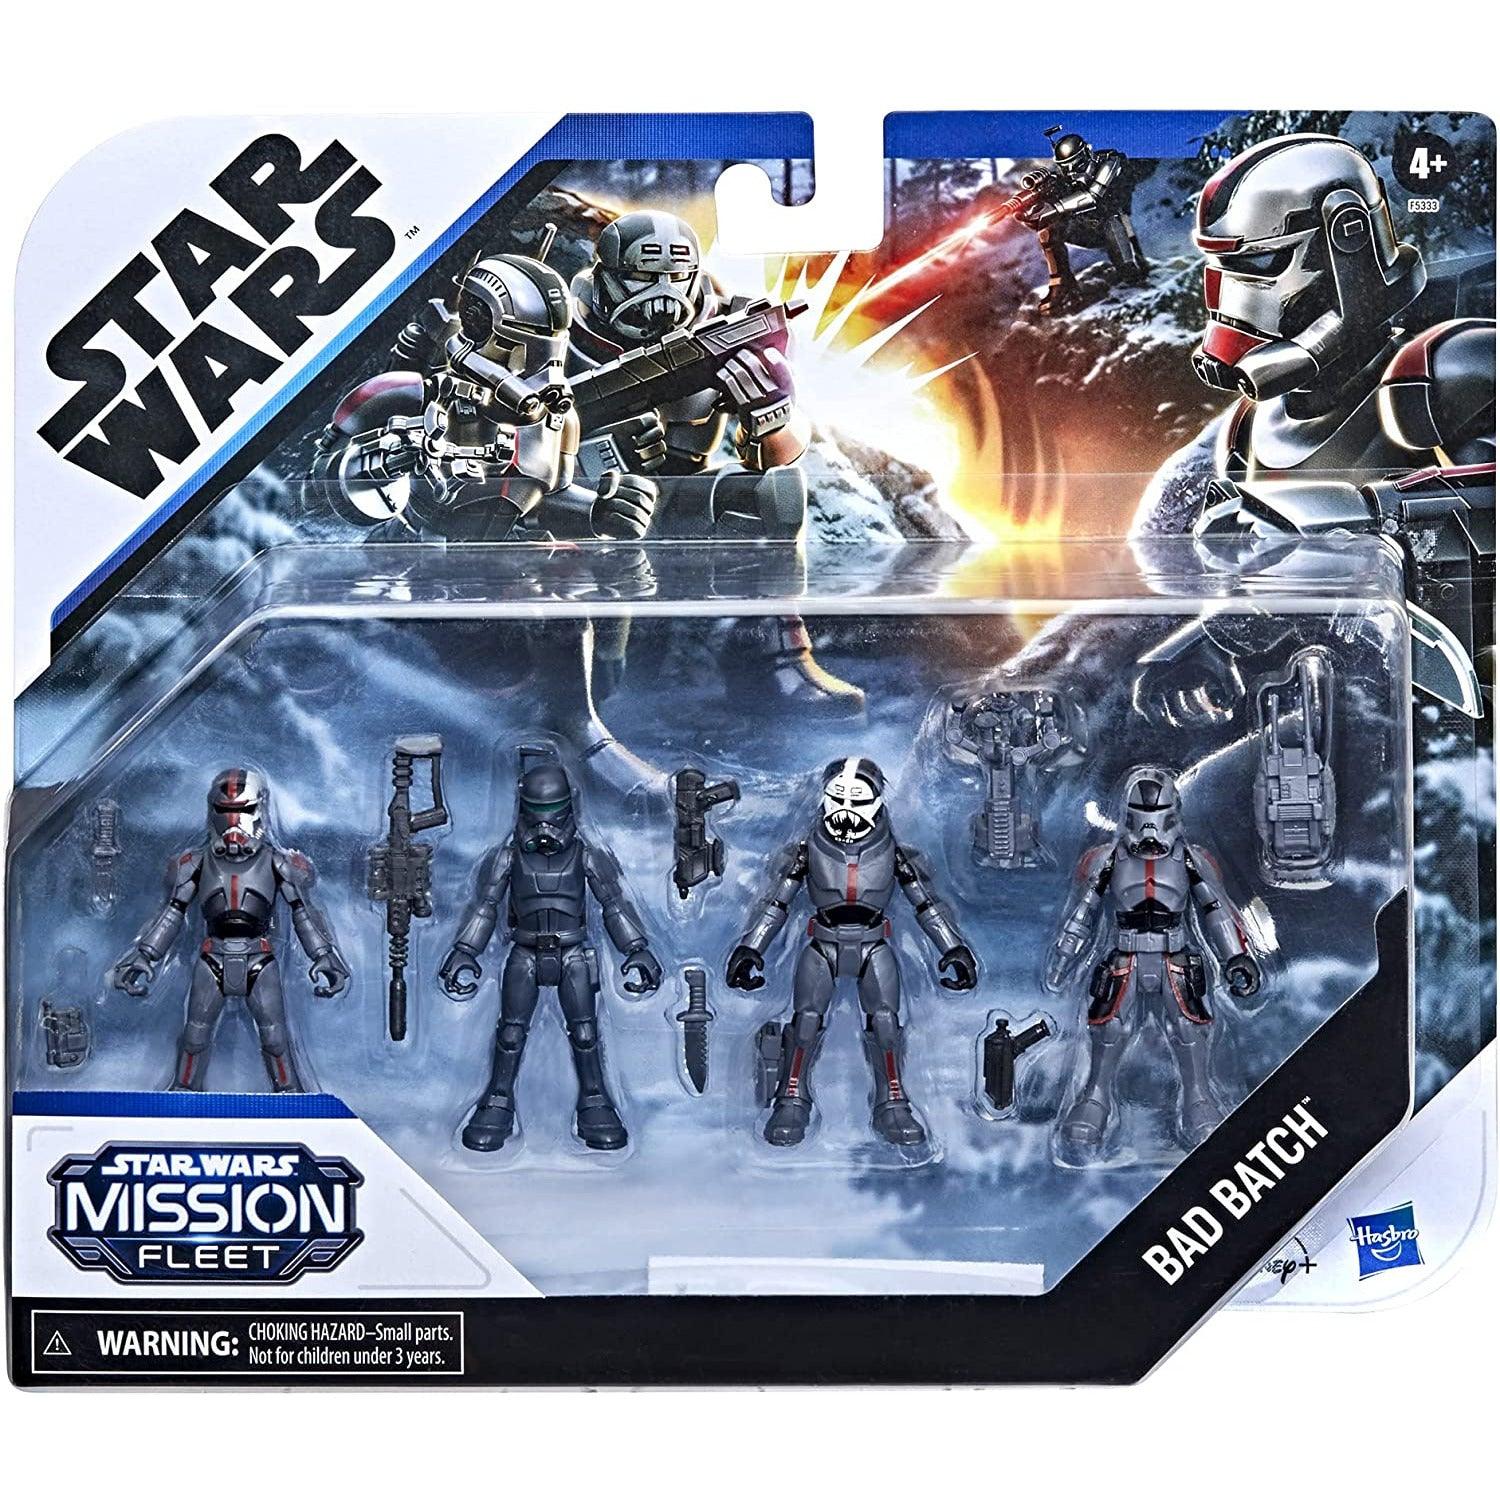 Star Wars Mission Fleet Clone Commando Clash 2.5-Inch-Scale Action Figure 4-Pack with Multiple Accessories, Toys for Kids Ages 4 and Up,F5333 - BumbleToys - 3+ years, Hasbro, Mandalorian, Mission Fleet, OXE, Pre-Order, star wars